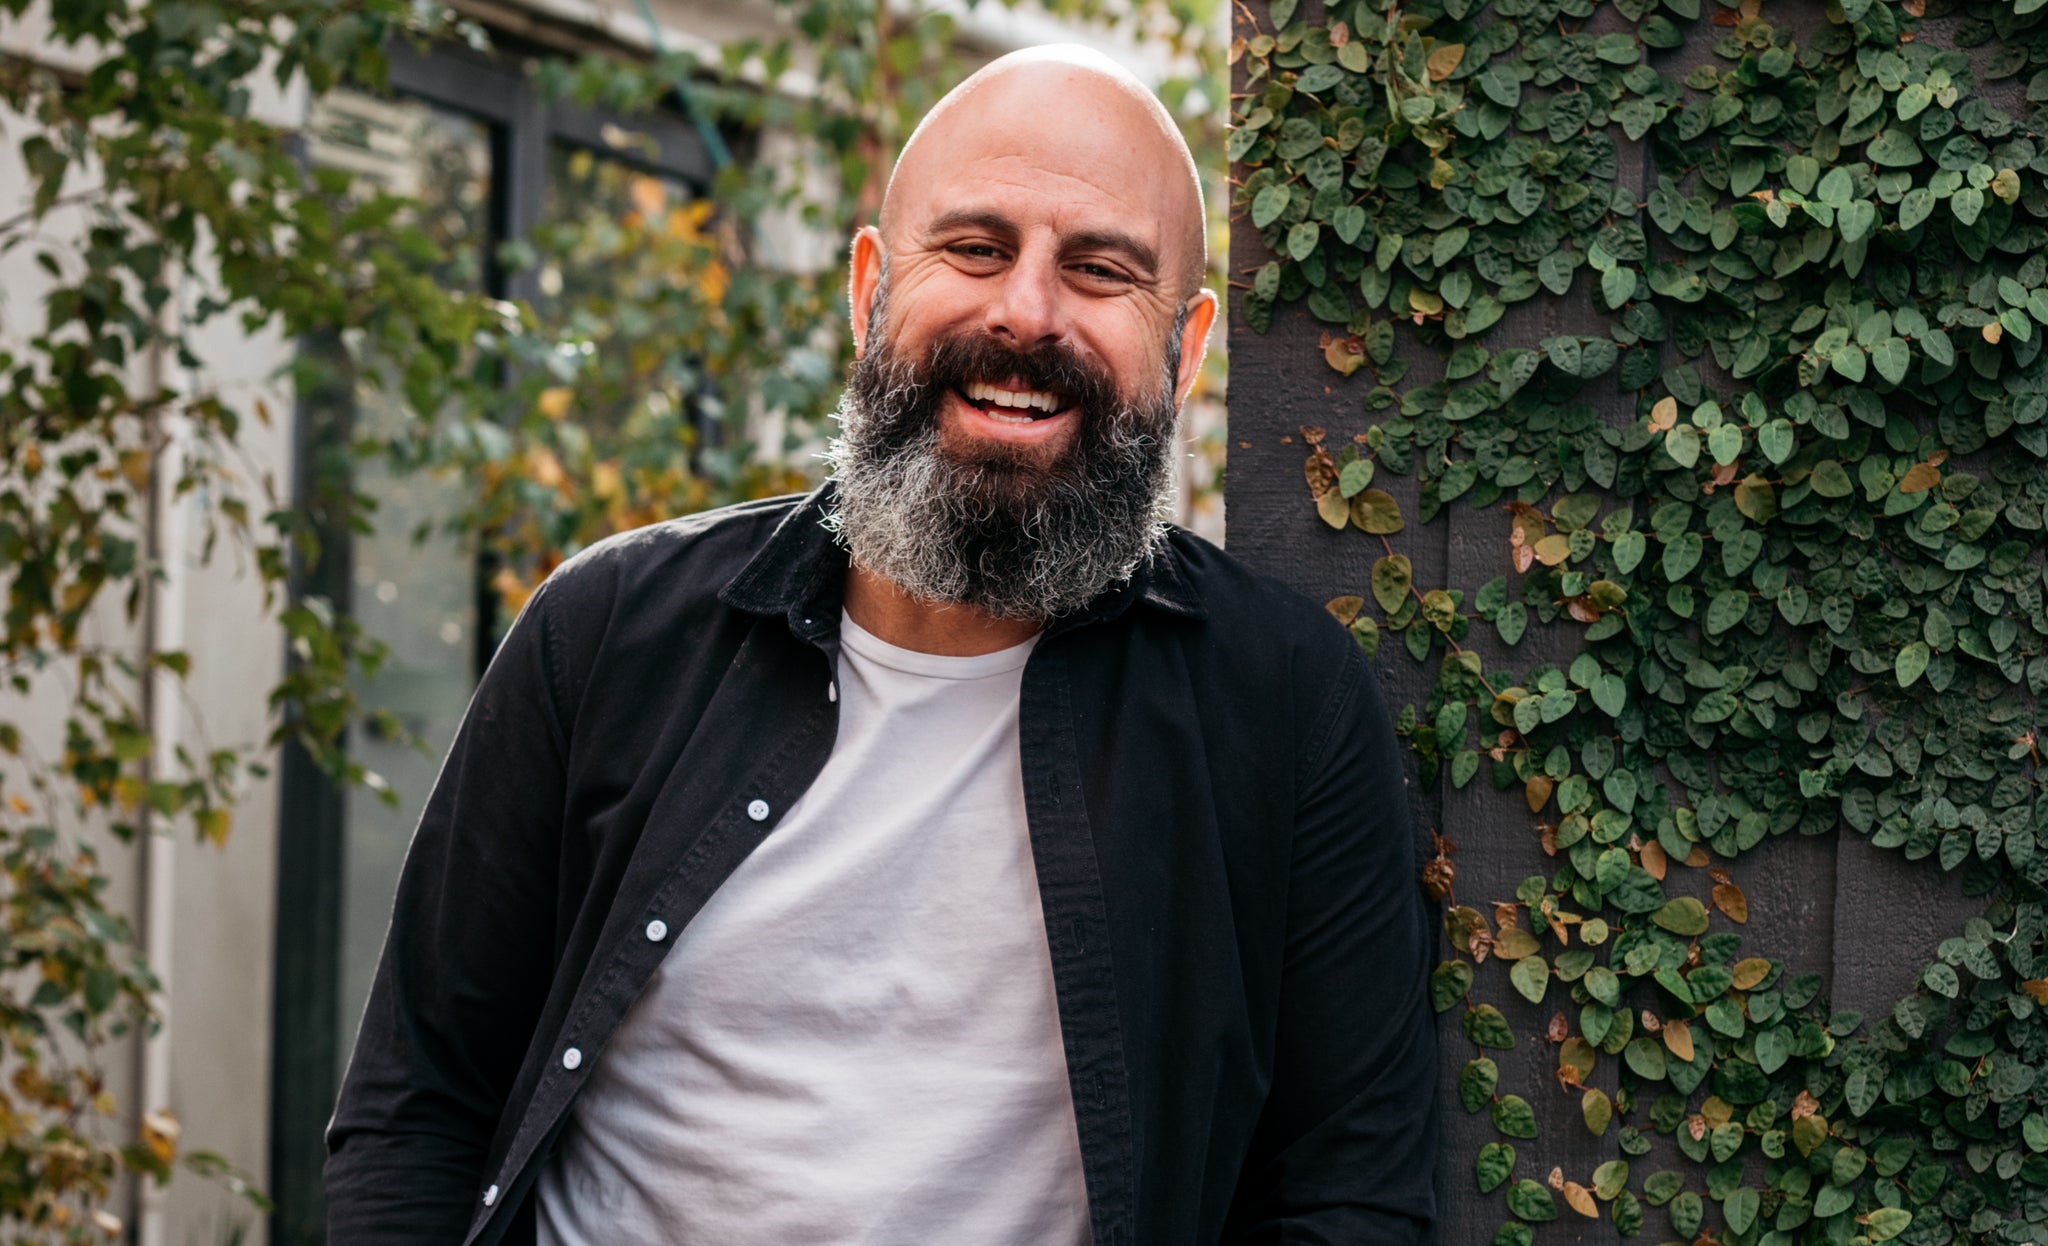 Pana Barbounis, founder of vegan chocolate brand Pana Organic is standing against a leafy background smiling. The title reads LOM x PANA ORGANIC